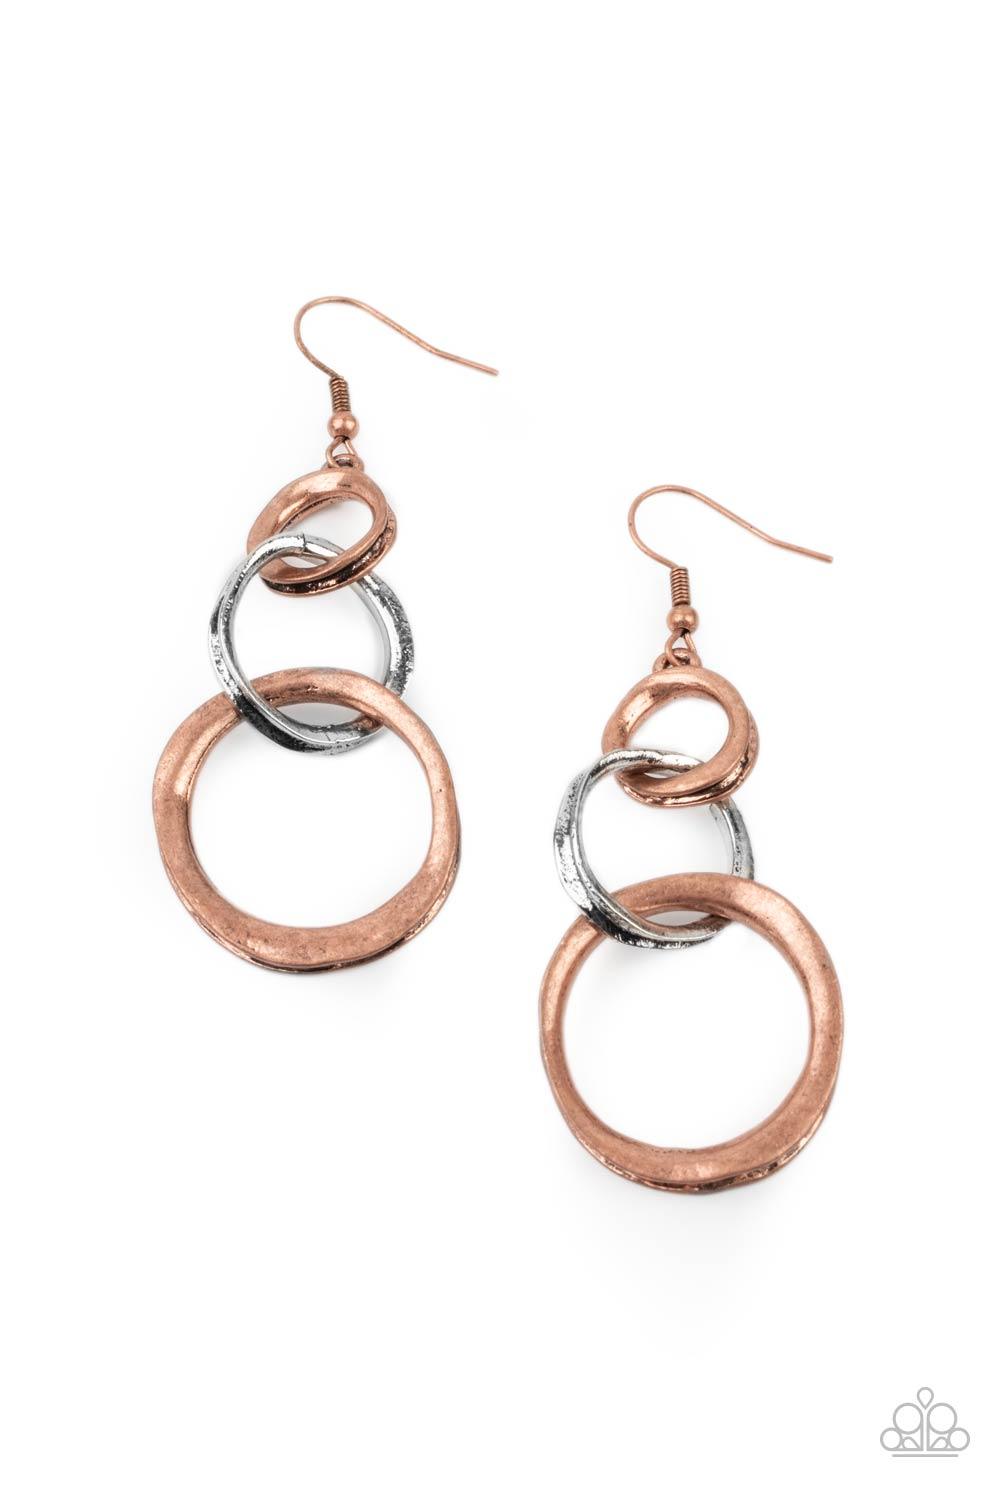 Paparazzi Accessories Harmoniously Handcrafted - Copper Featuring an antiqued beveled center, warped copper and silver rings asymmetrically connect into a rustic lure. Earring attaches to a standard fishhook fitting. Sold as one pair of earrings. Jewelry